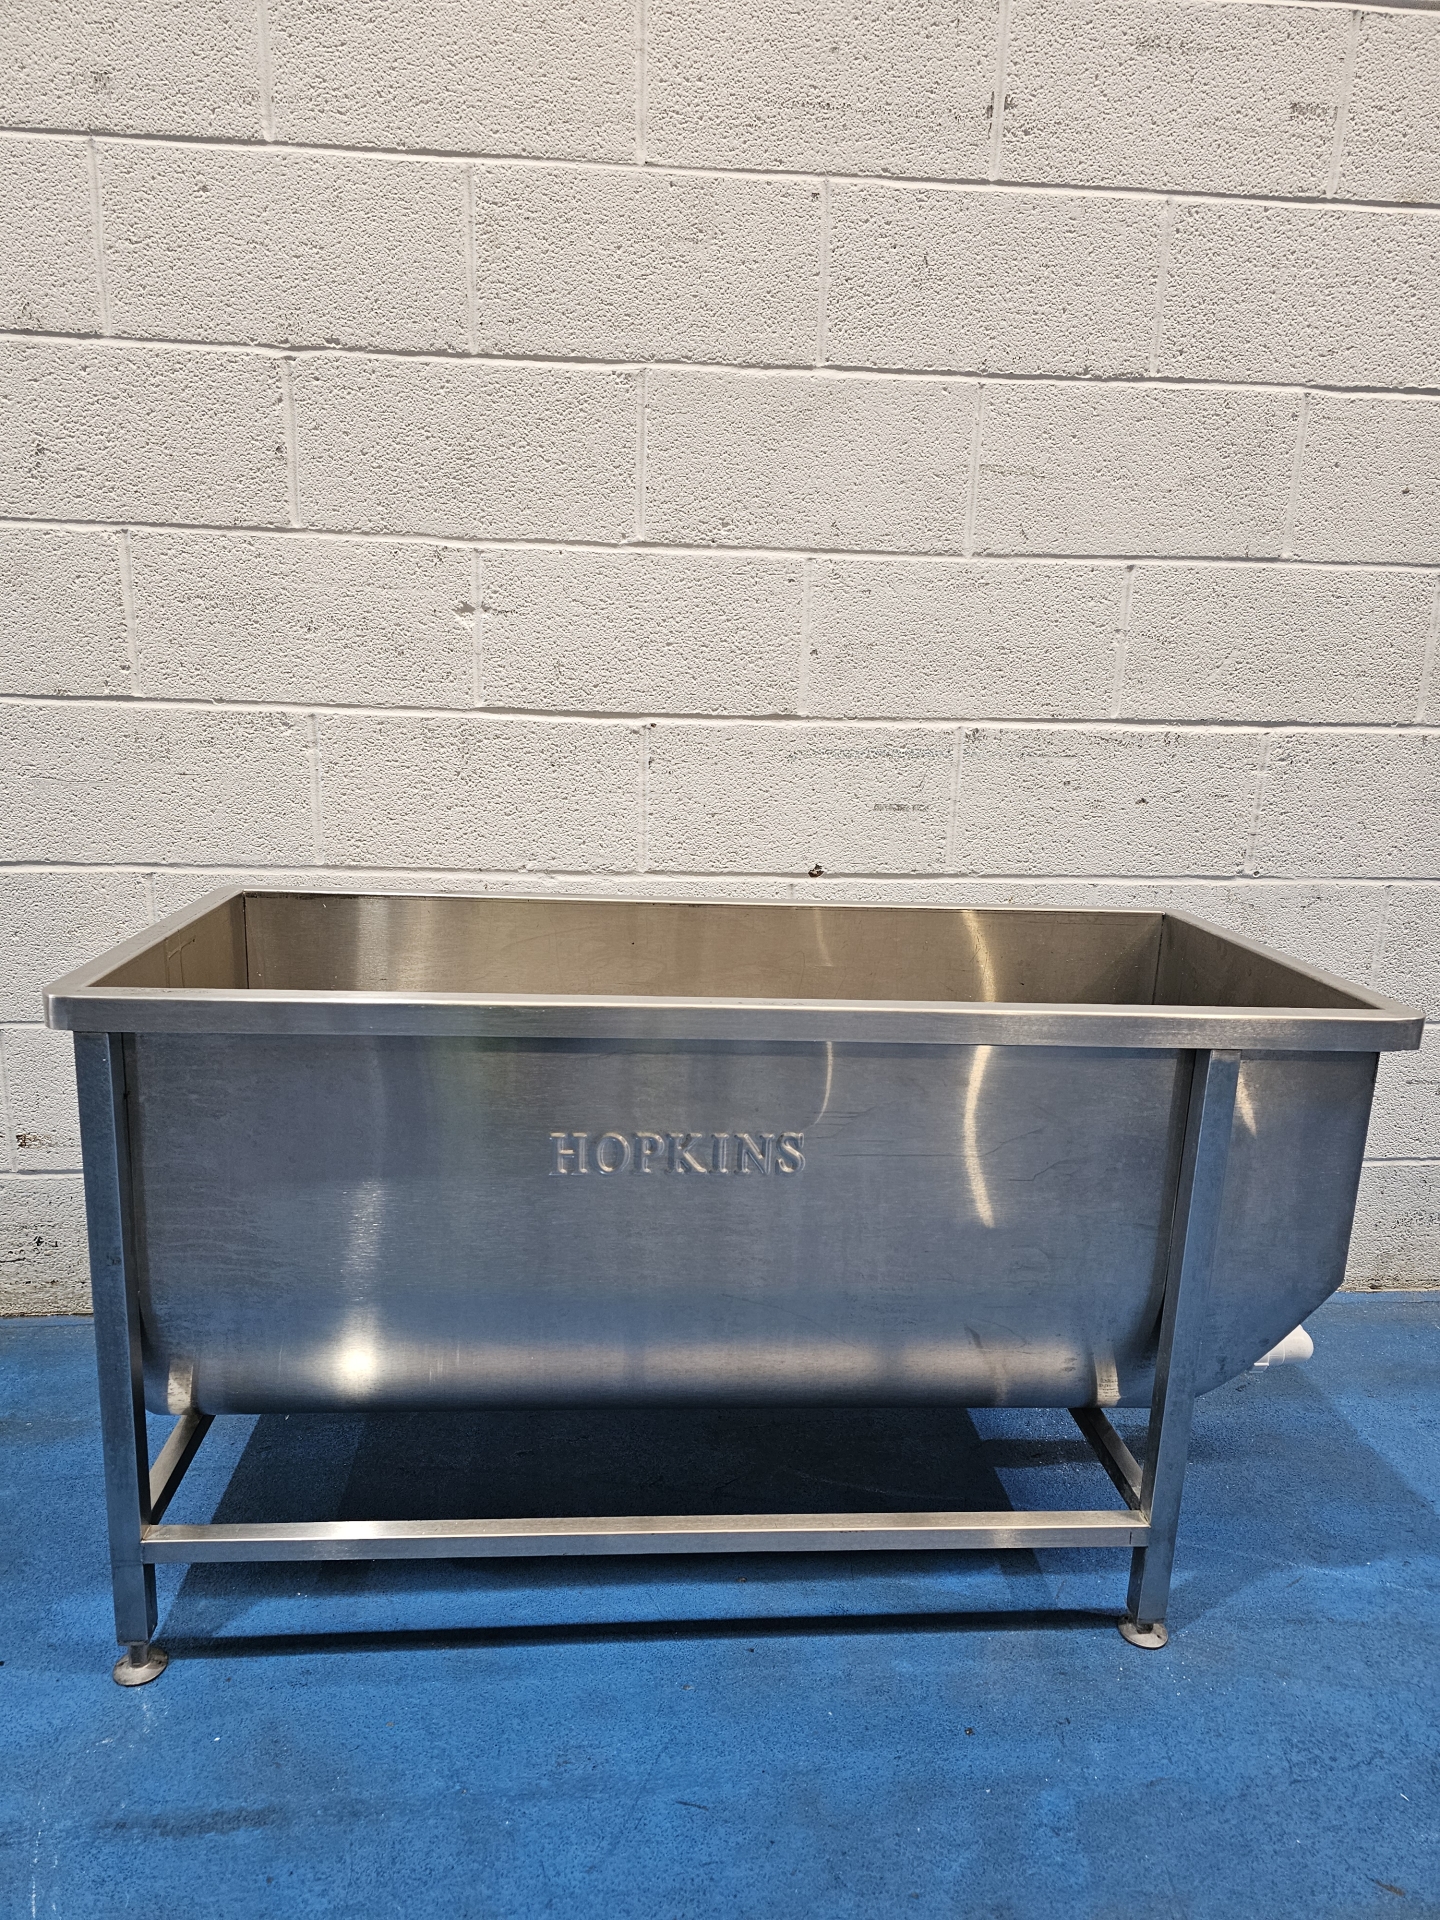 Hopkins Stainless Trough 